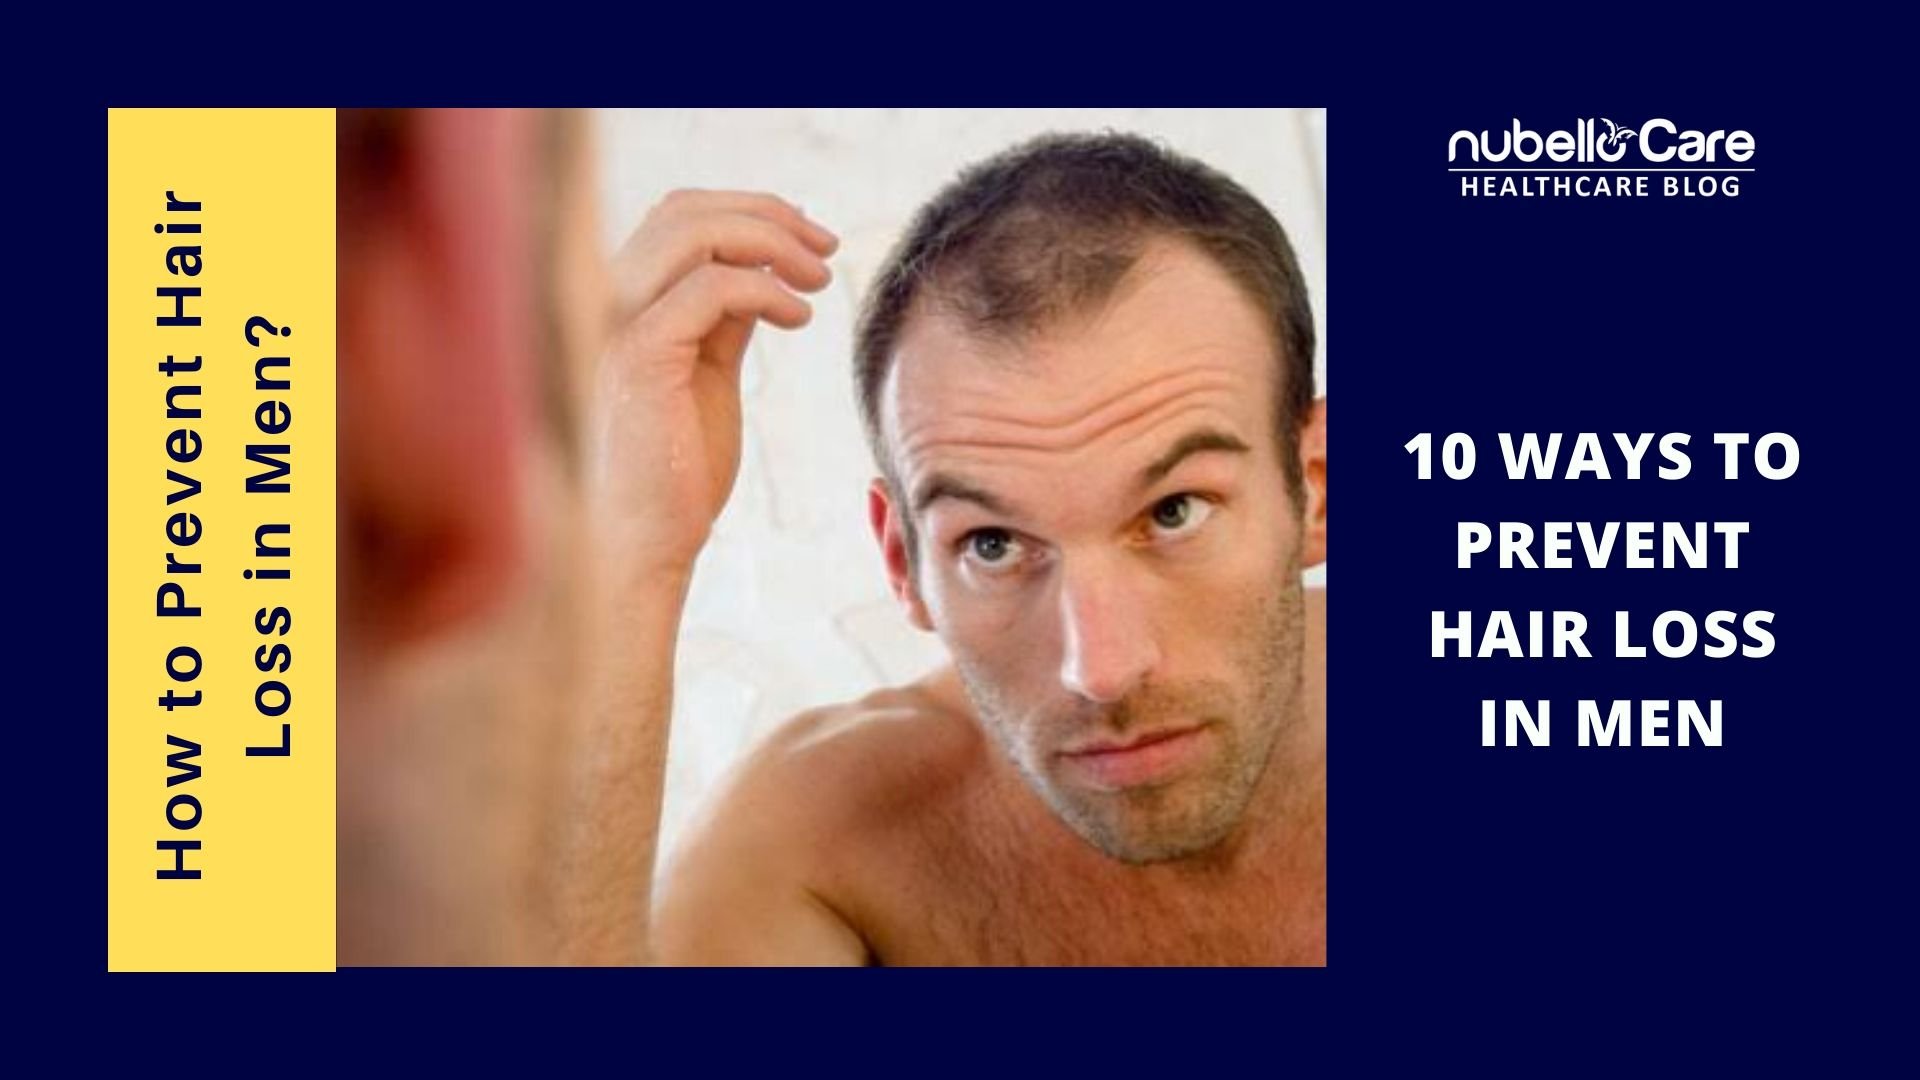 How to Prevent Hair Loss in Men? Here are 10 ways!